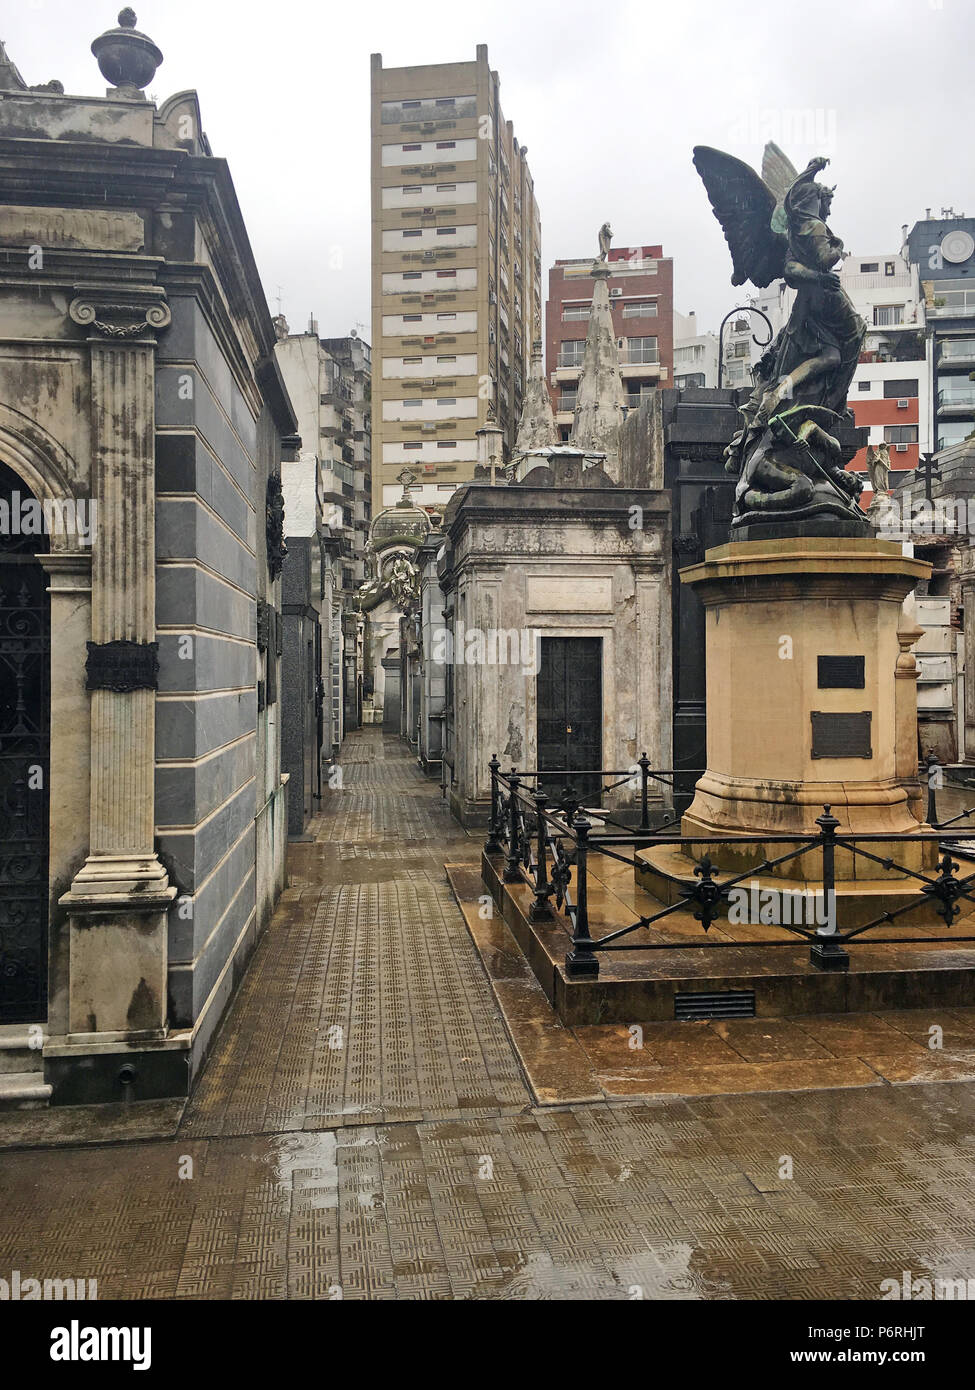 Buenos Aires, Tombs at the recoleta cemetery. Argentina. Stock Photo